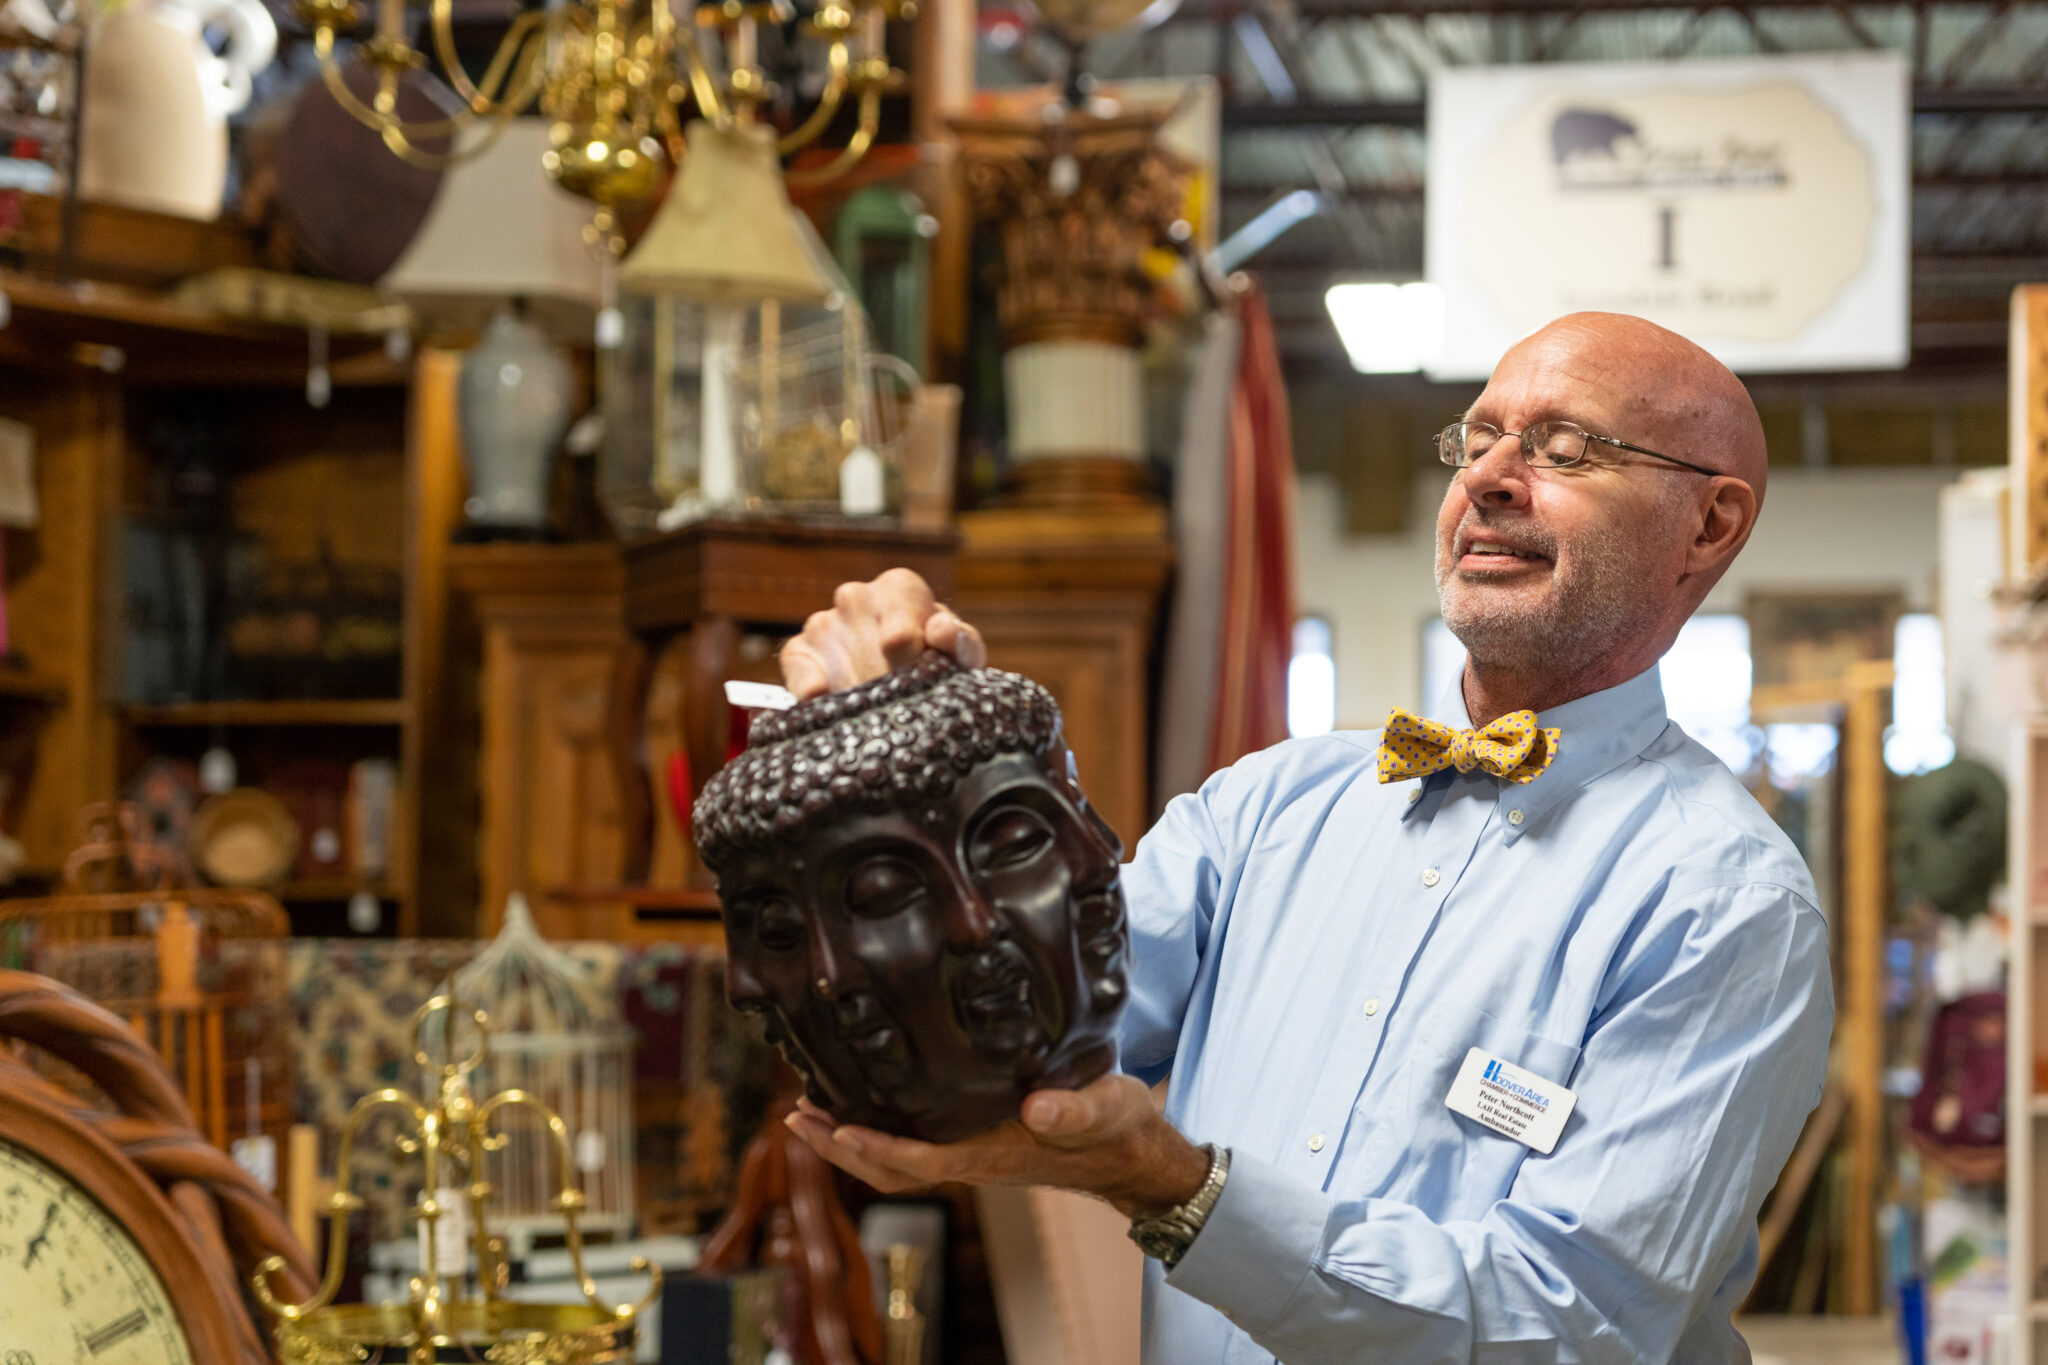 Meet the man behind 7 unique booths at Brass Bear Antiques